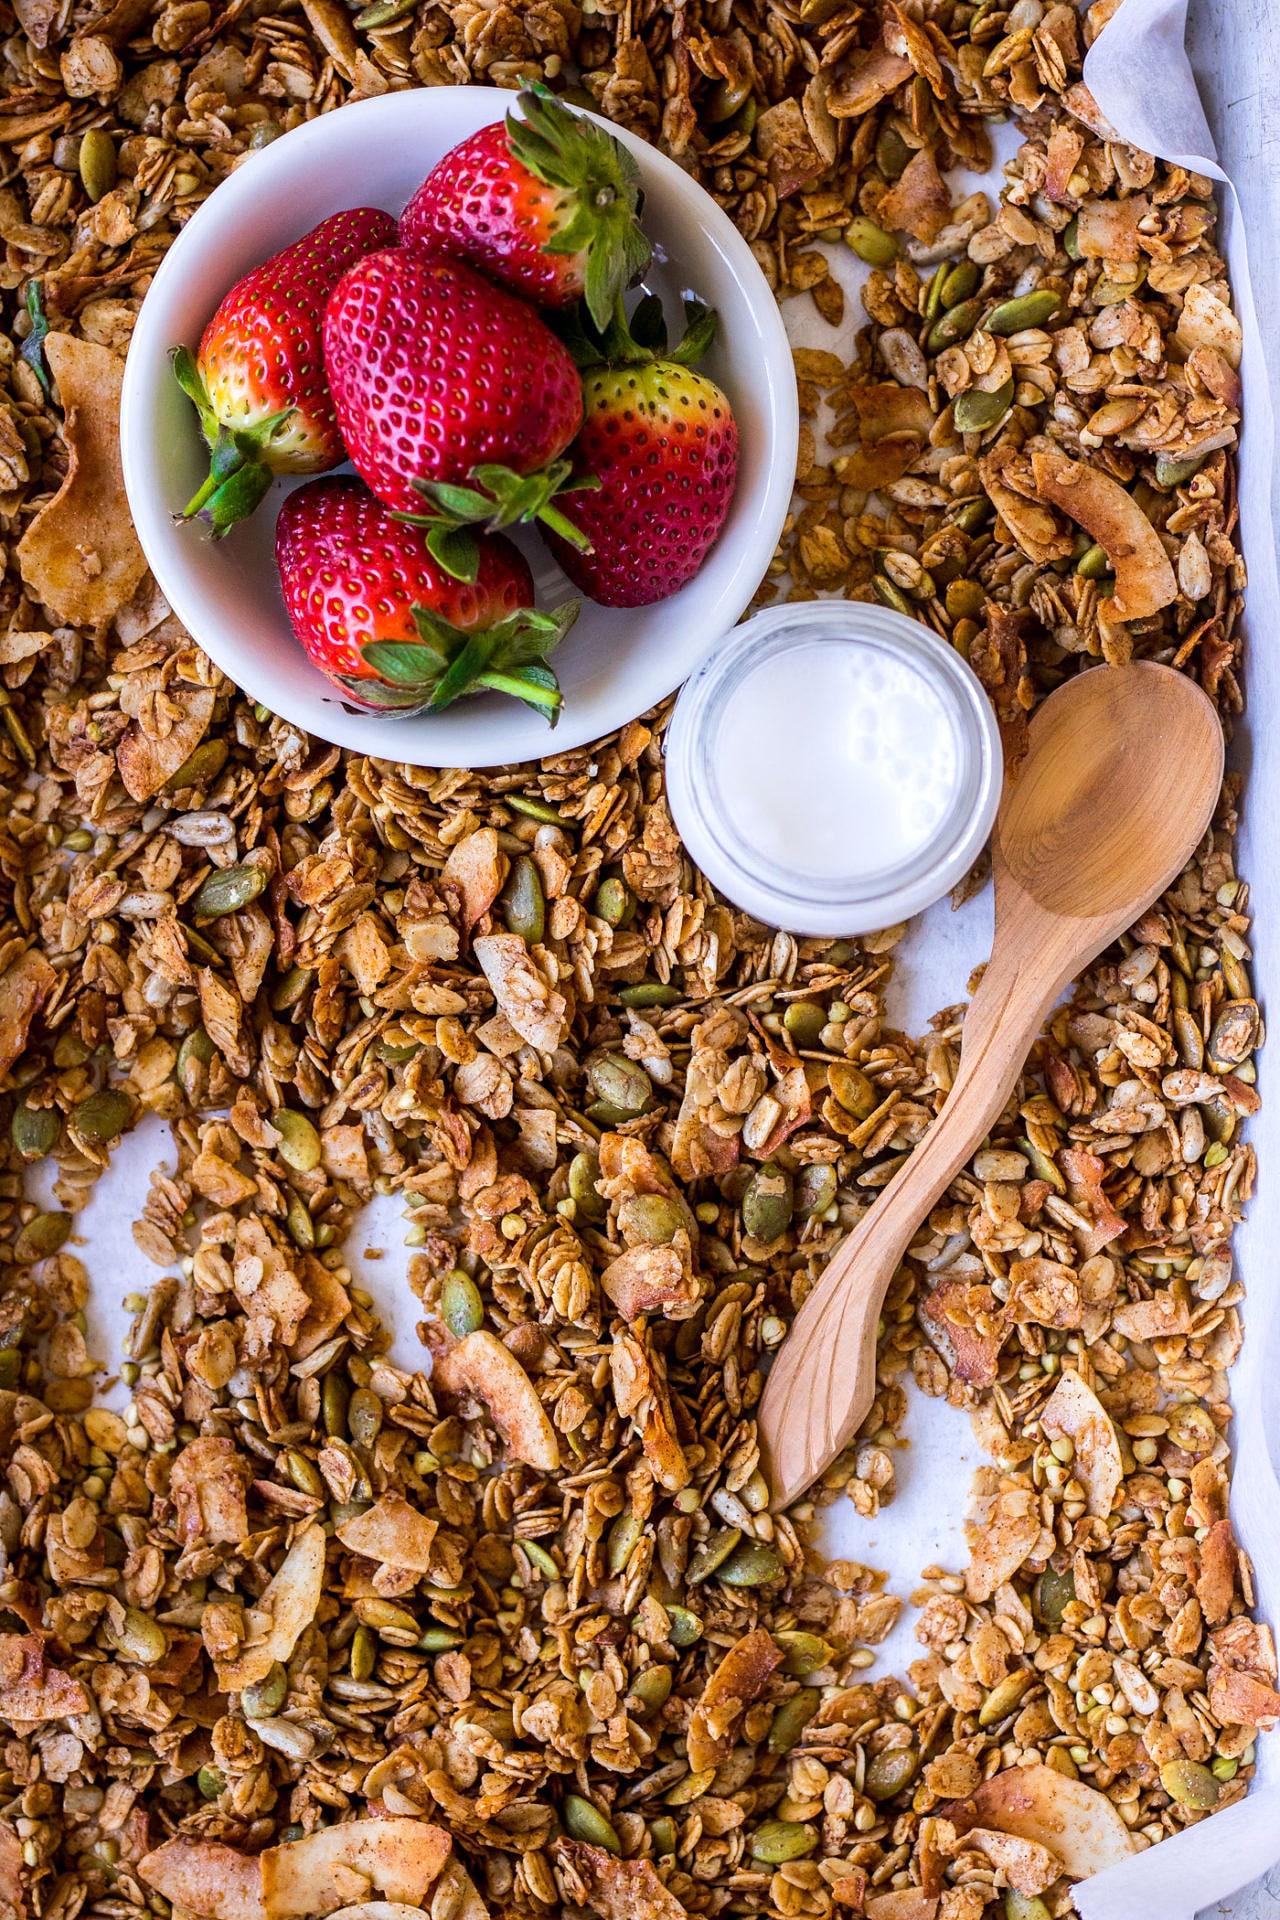 Baking tray spread out with granola, small bowl of strawberries, milk jar and small wooden spoon